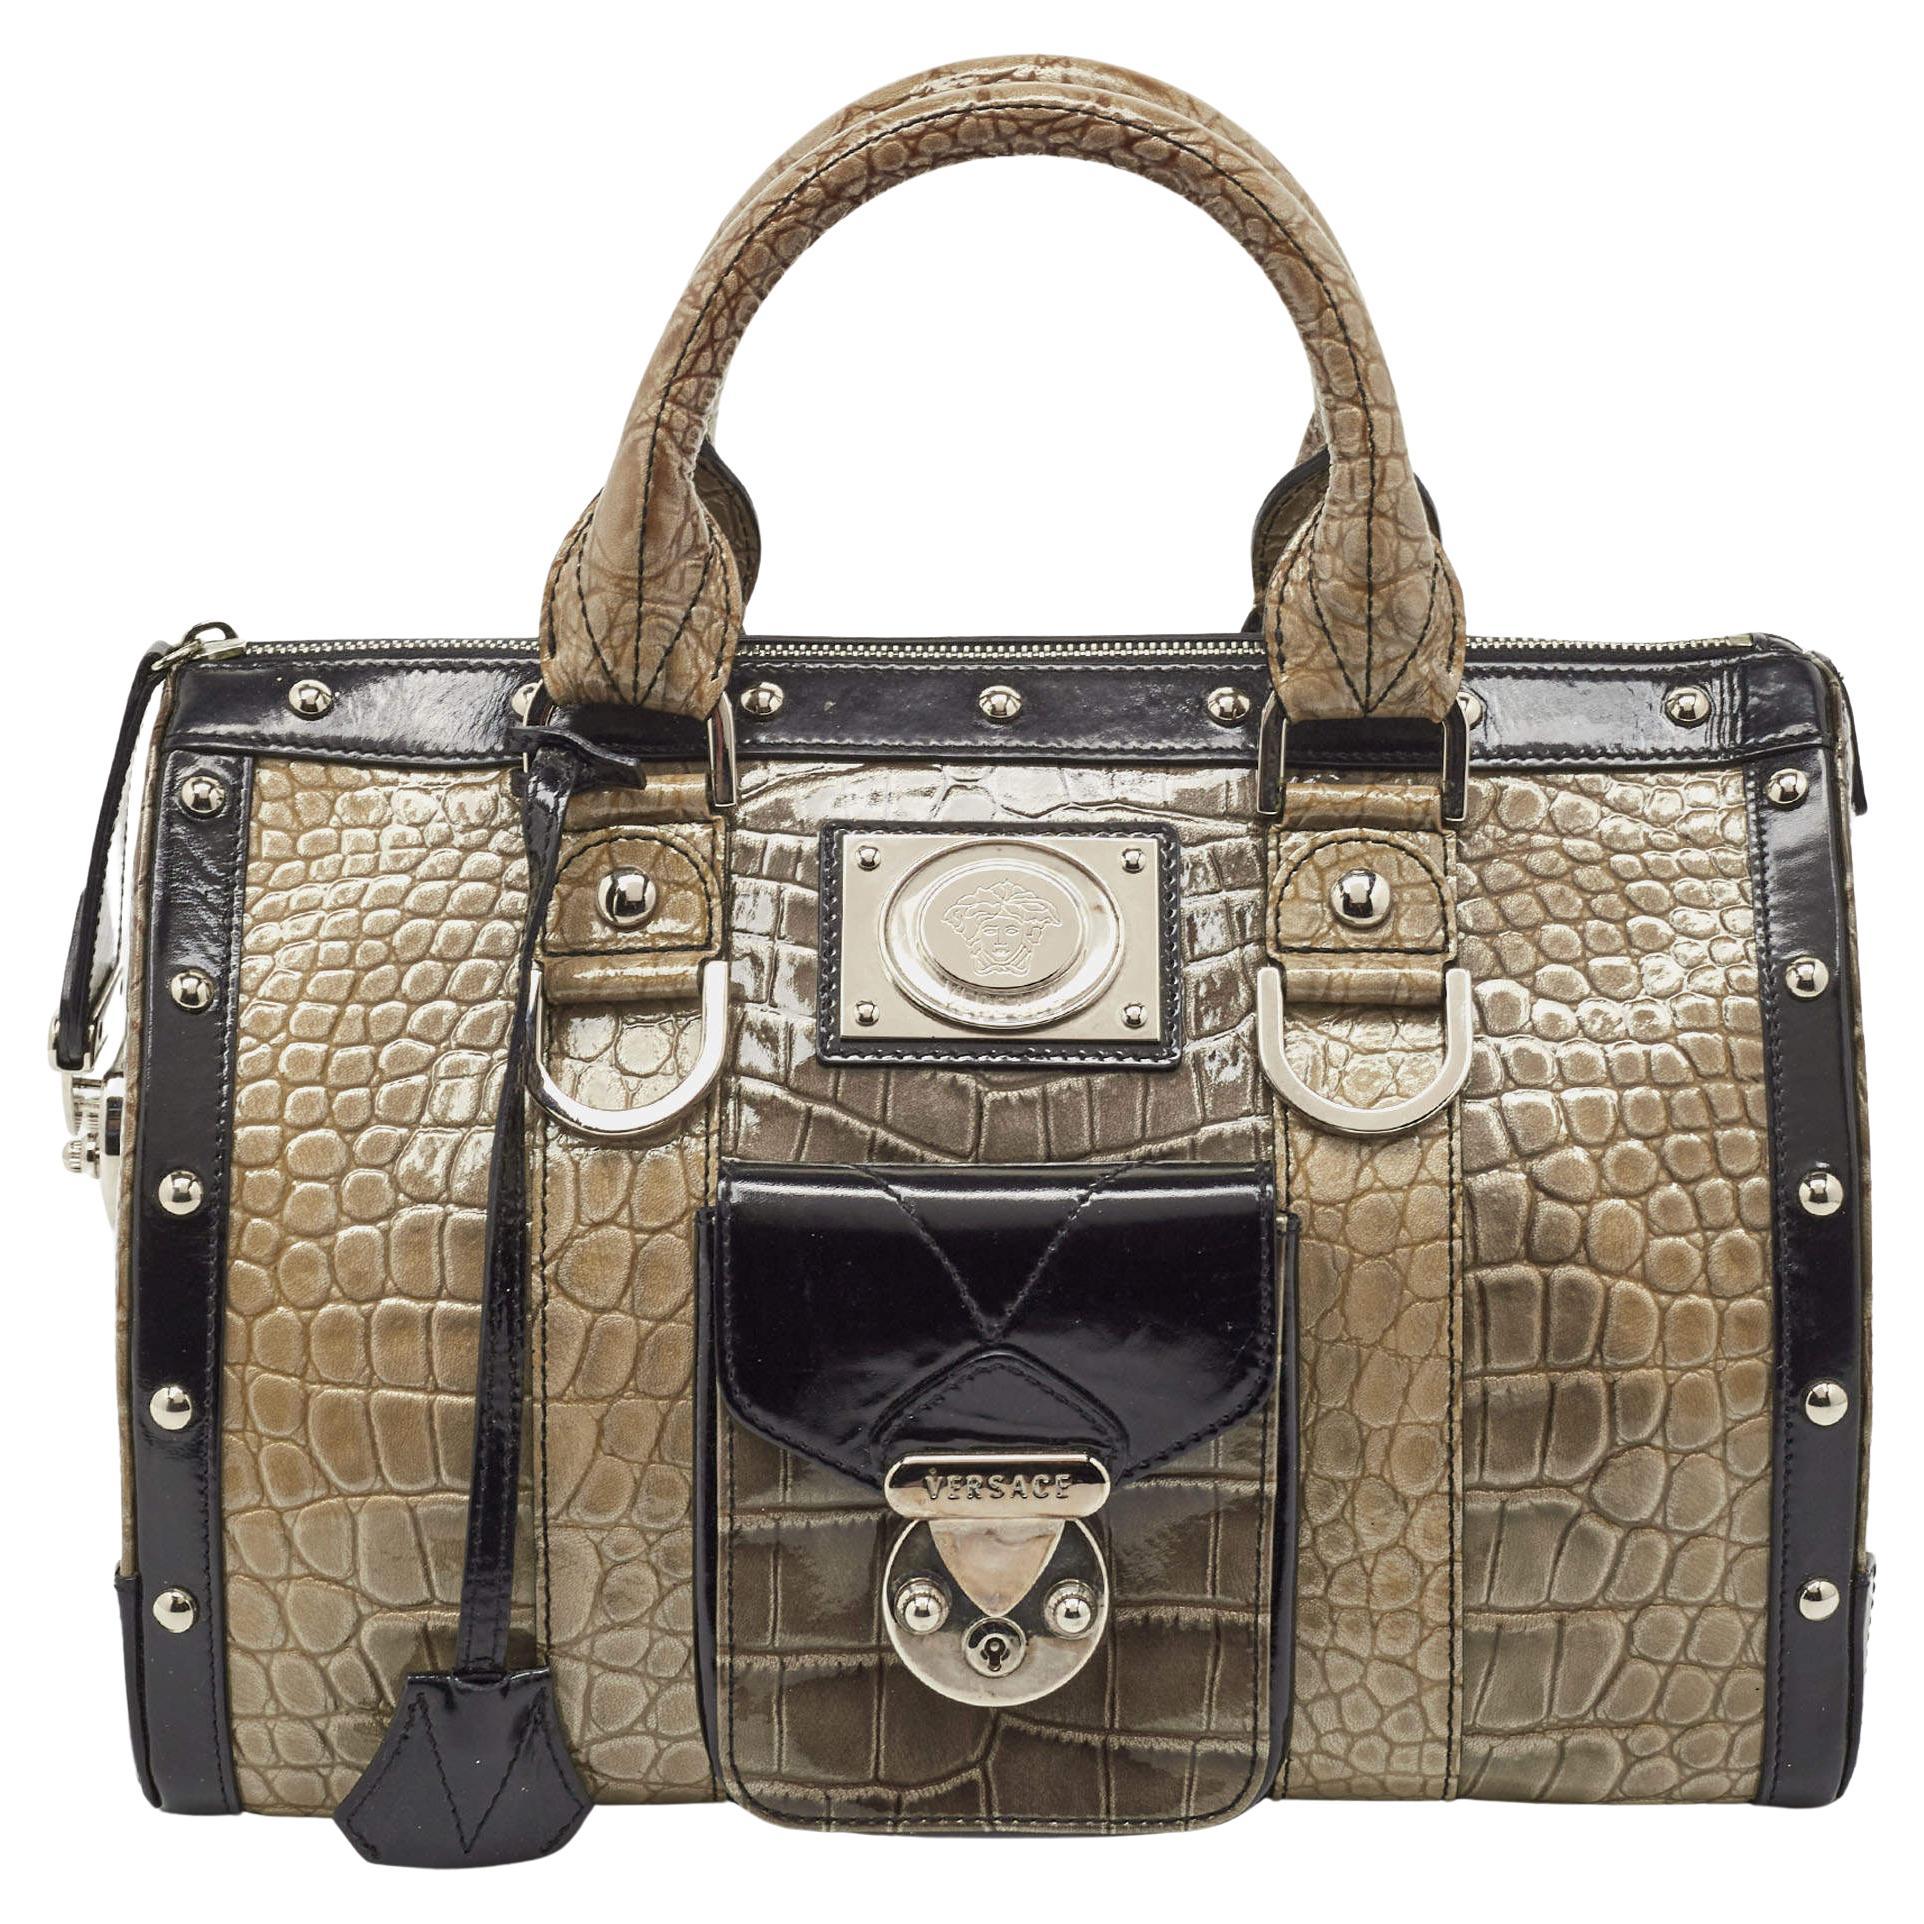 Versace Black/Beige Croc Embossed and Patent Leather Studded Madonna Satchel For Sale